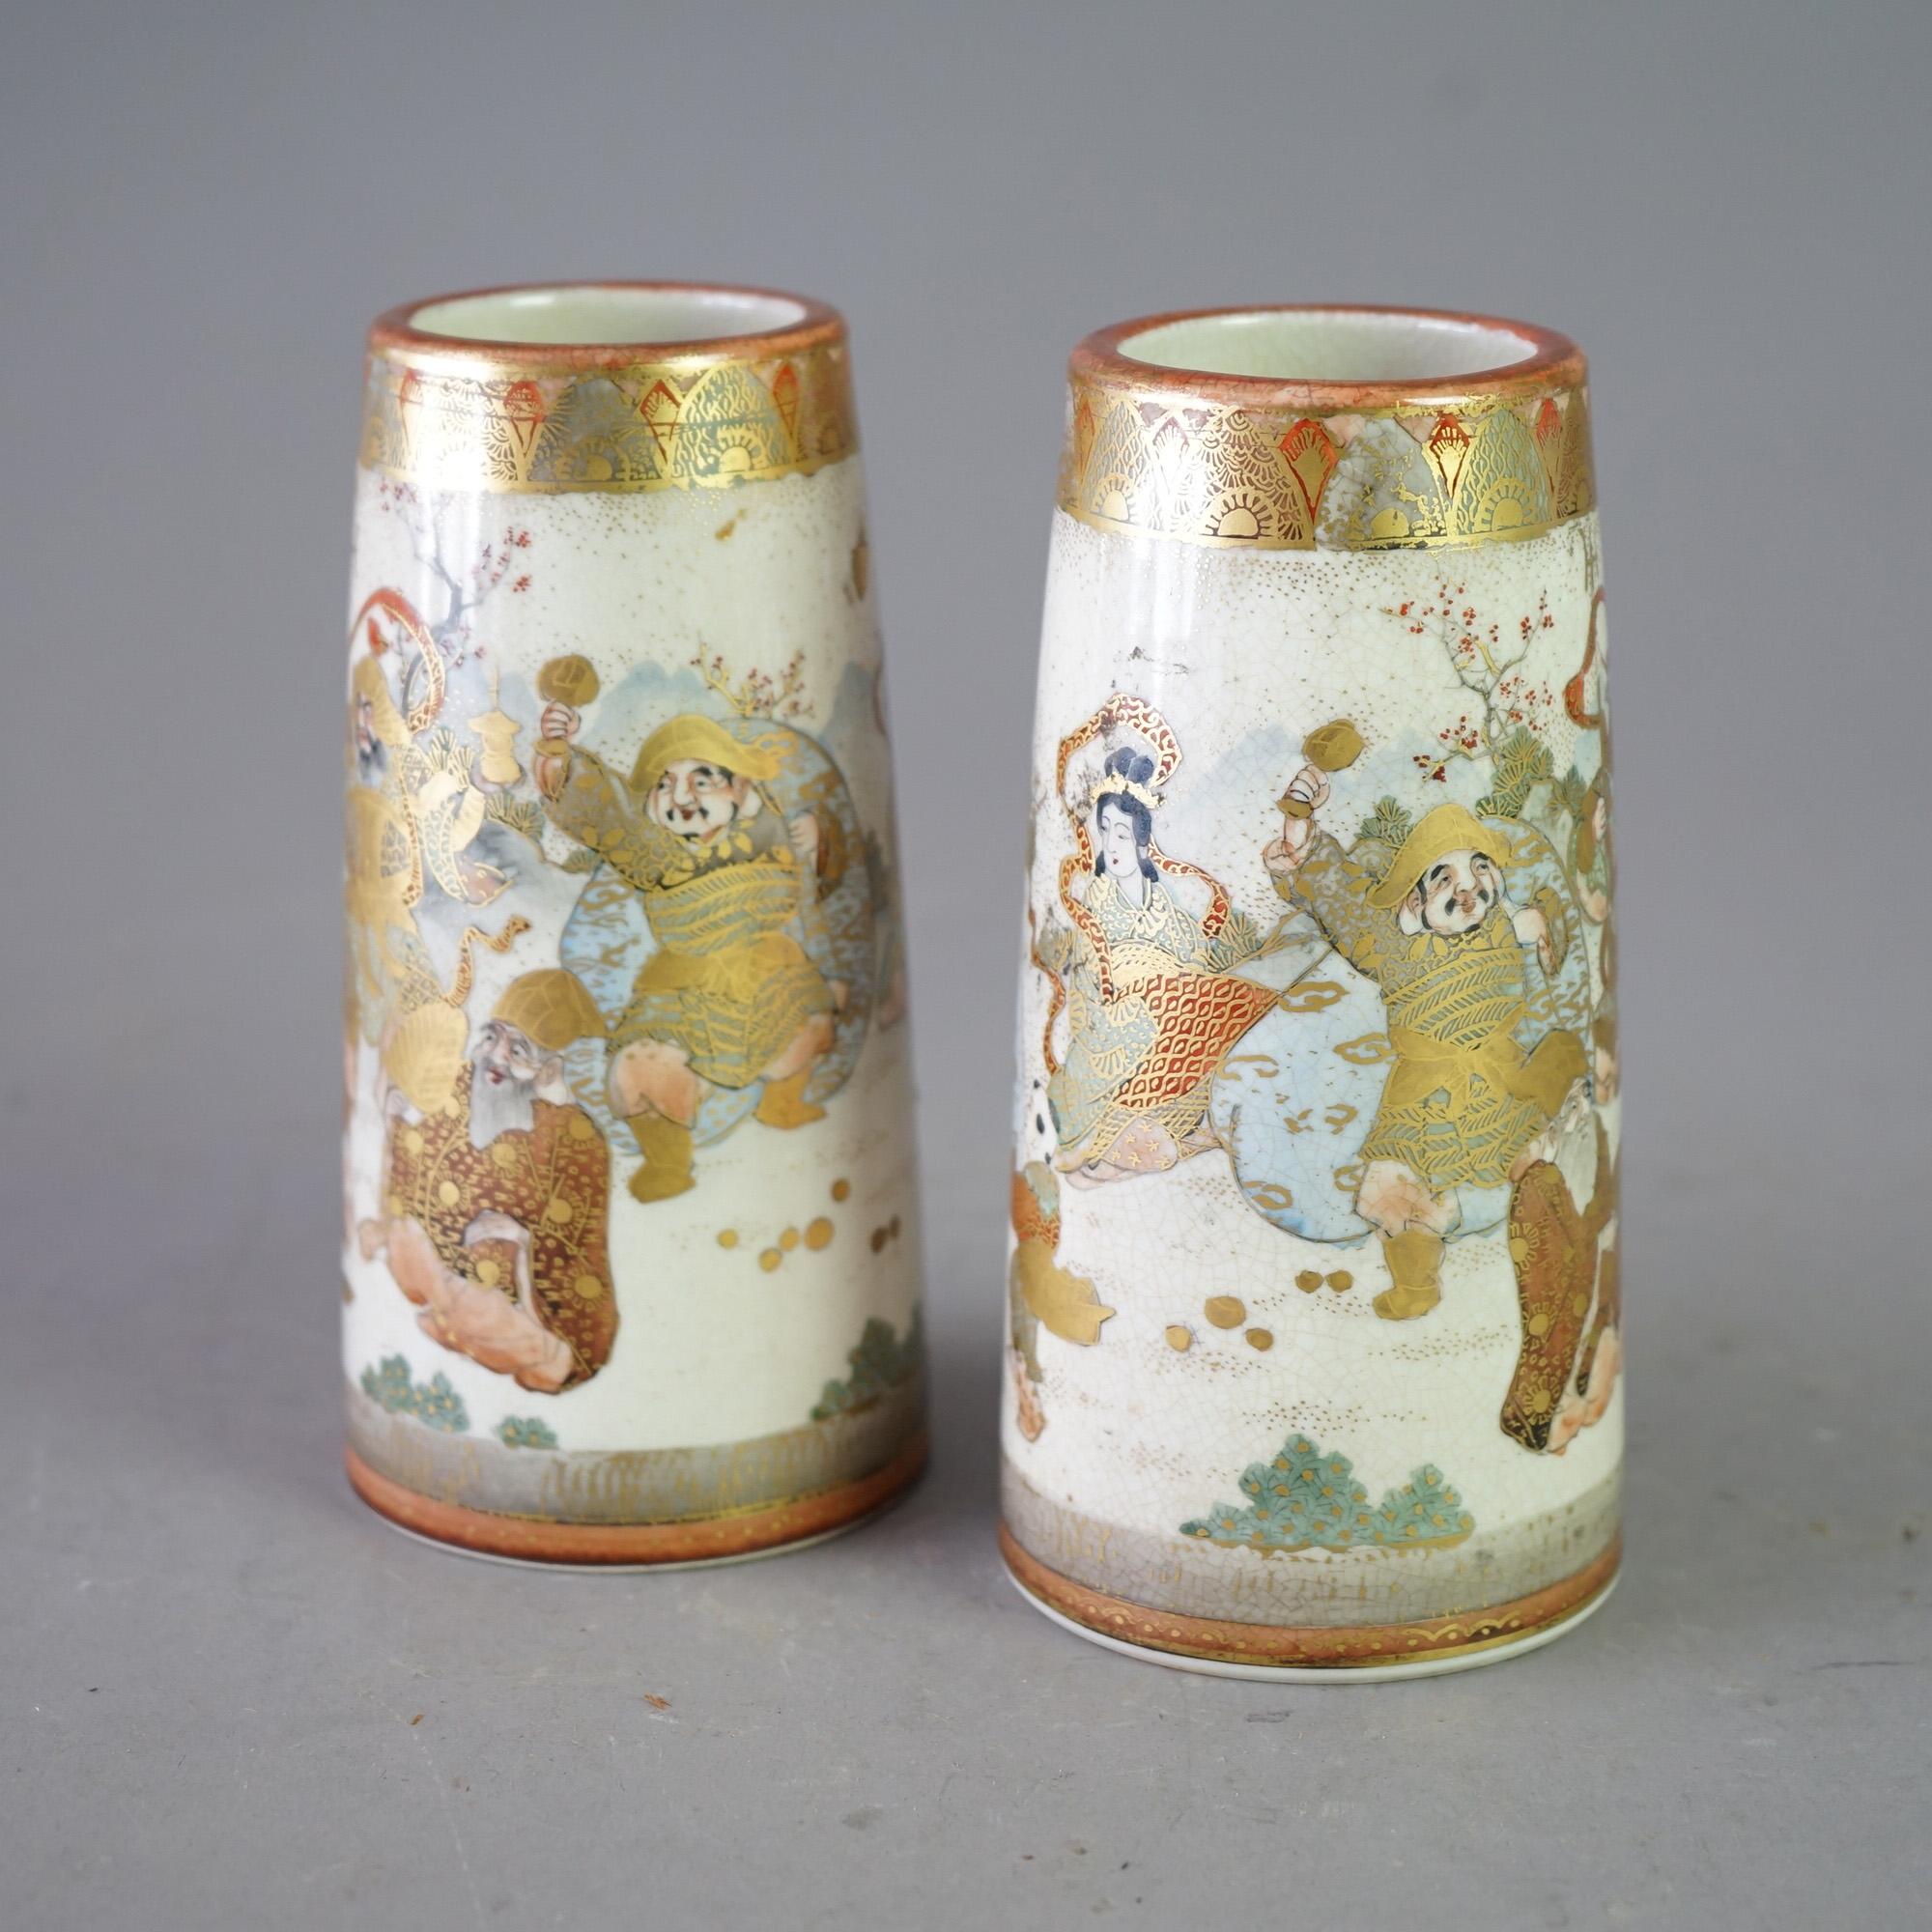 An antique pair of Meiji Satsuma vases offers porcelain construction with hand painted figures and gilt highlights throughout, bases stamped as photographed, c1900

Measure - 6